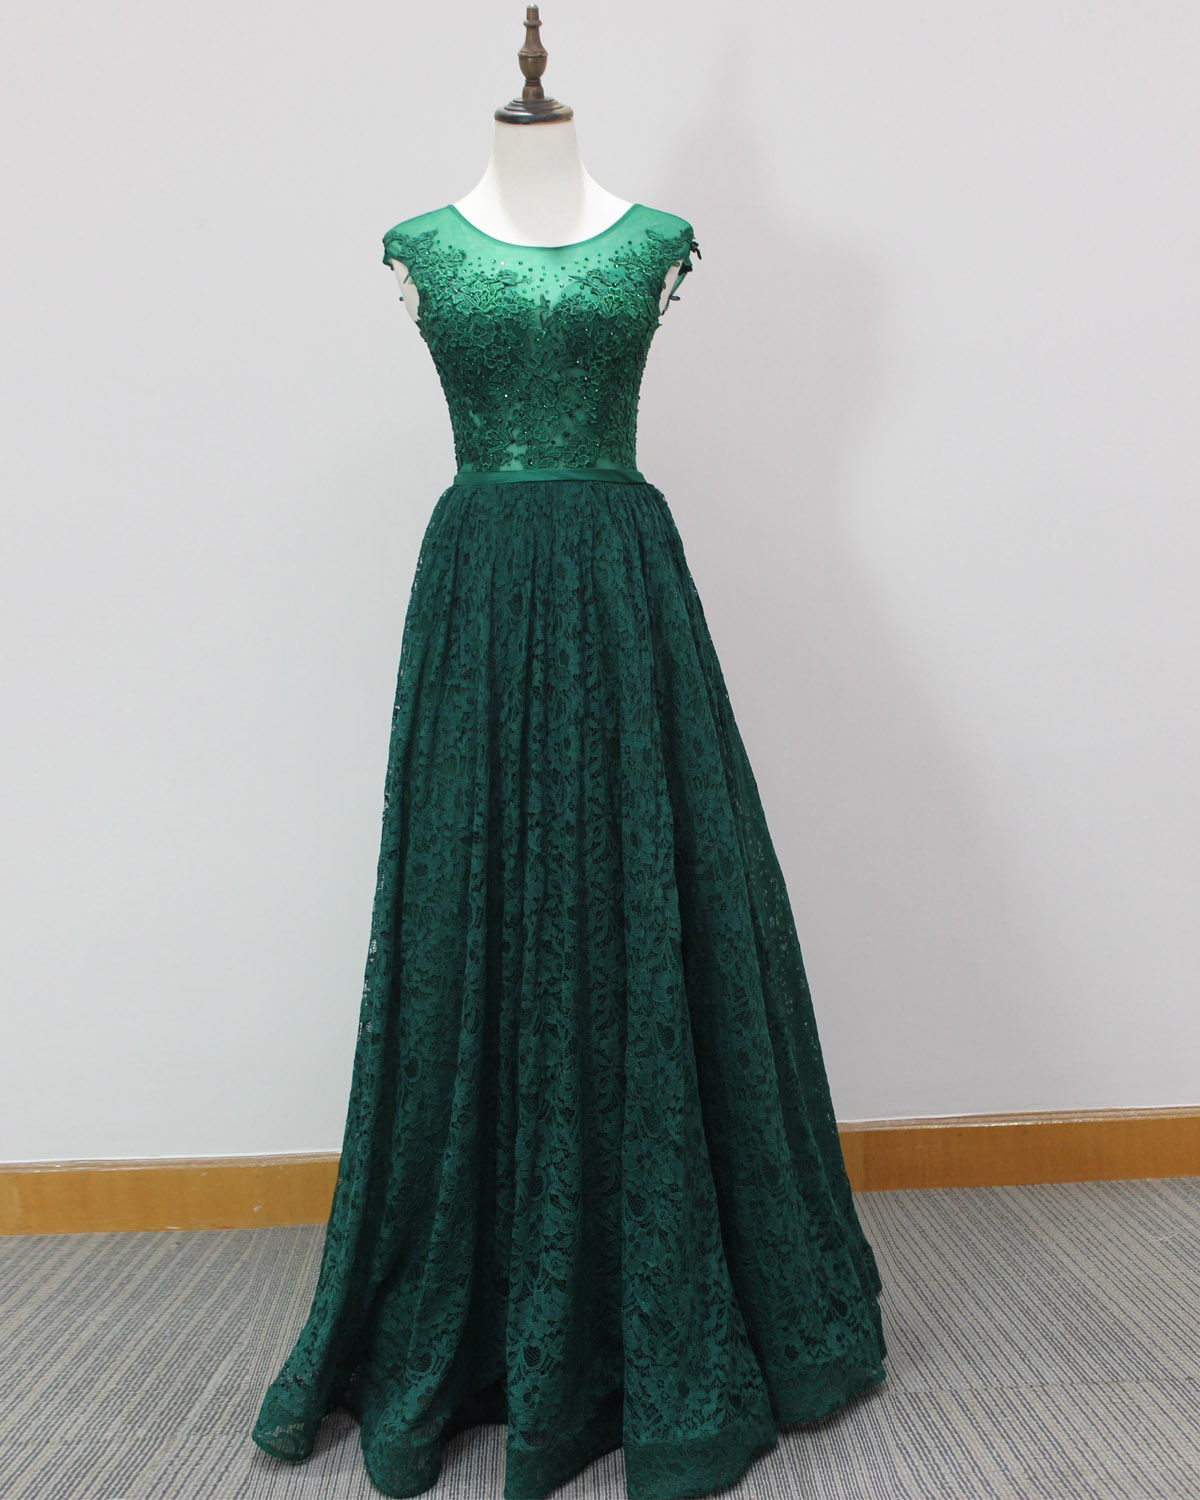 Plus Size Green Lace Prom Dresses 2018 Sexy Sheer Lace Formal Evening Dresses Custom Made Wedding Party Gowns ,off Shoulder Prom Dress, Pageant